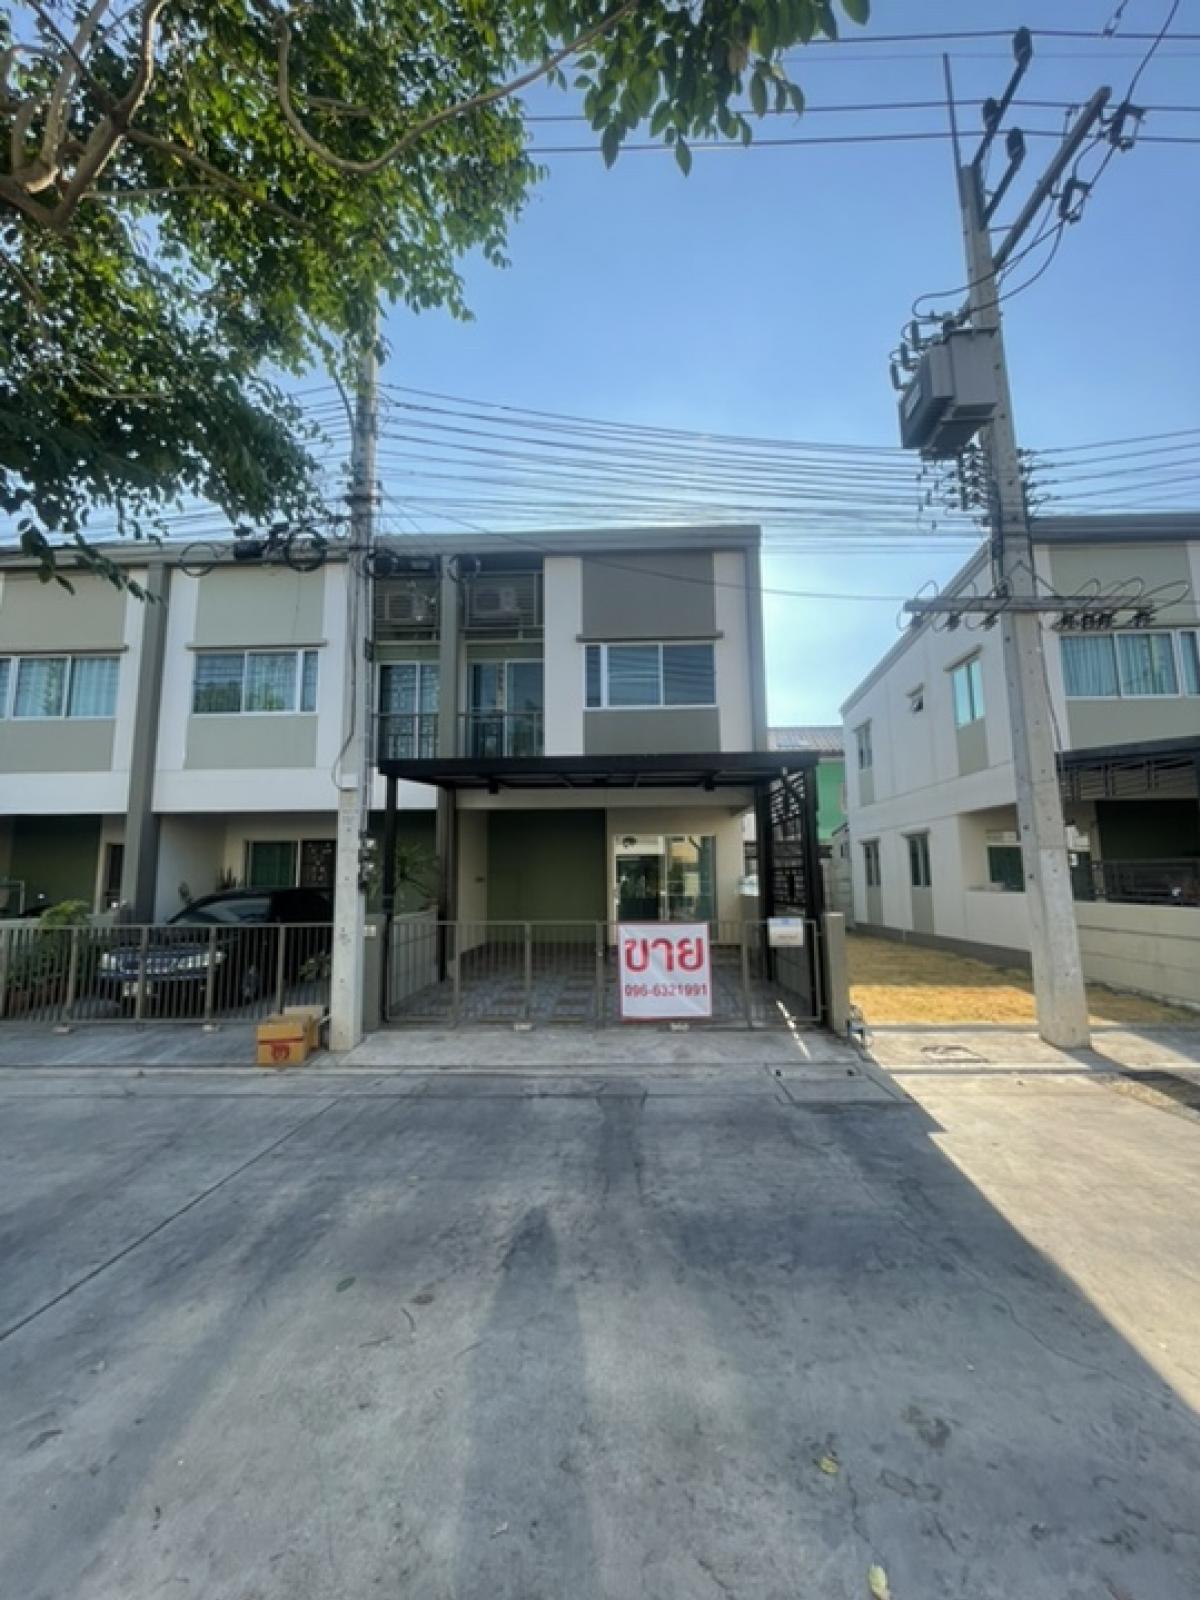 For SaleTownhousePathum Thani,Rangsit, Thammasat : Best value in the village The owner sells it himself, Lumpini Townville Rangsit Khlong 2, Baan Rim, wider, fully renovated, townhouse, 3 bedrooms, 2 bathrooms.